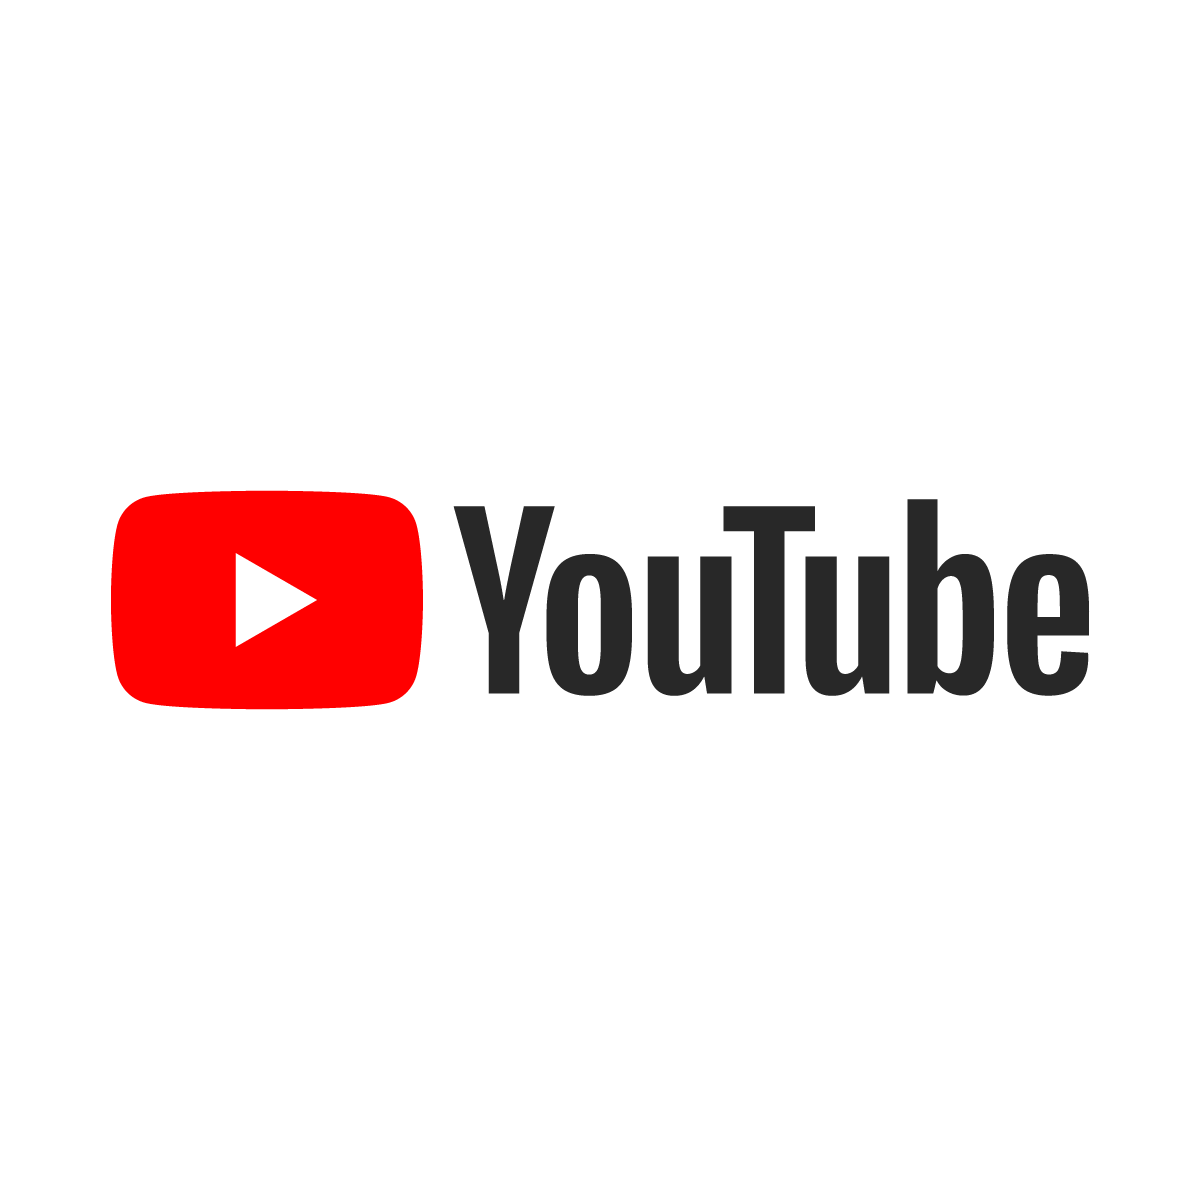 Is YouTube Right for Your Company?